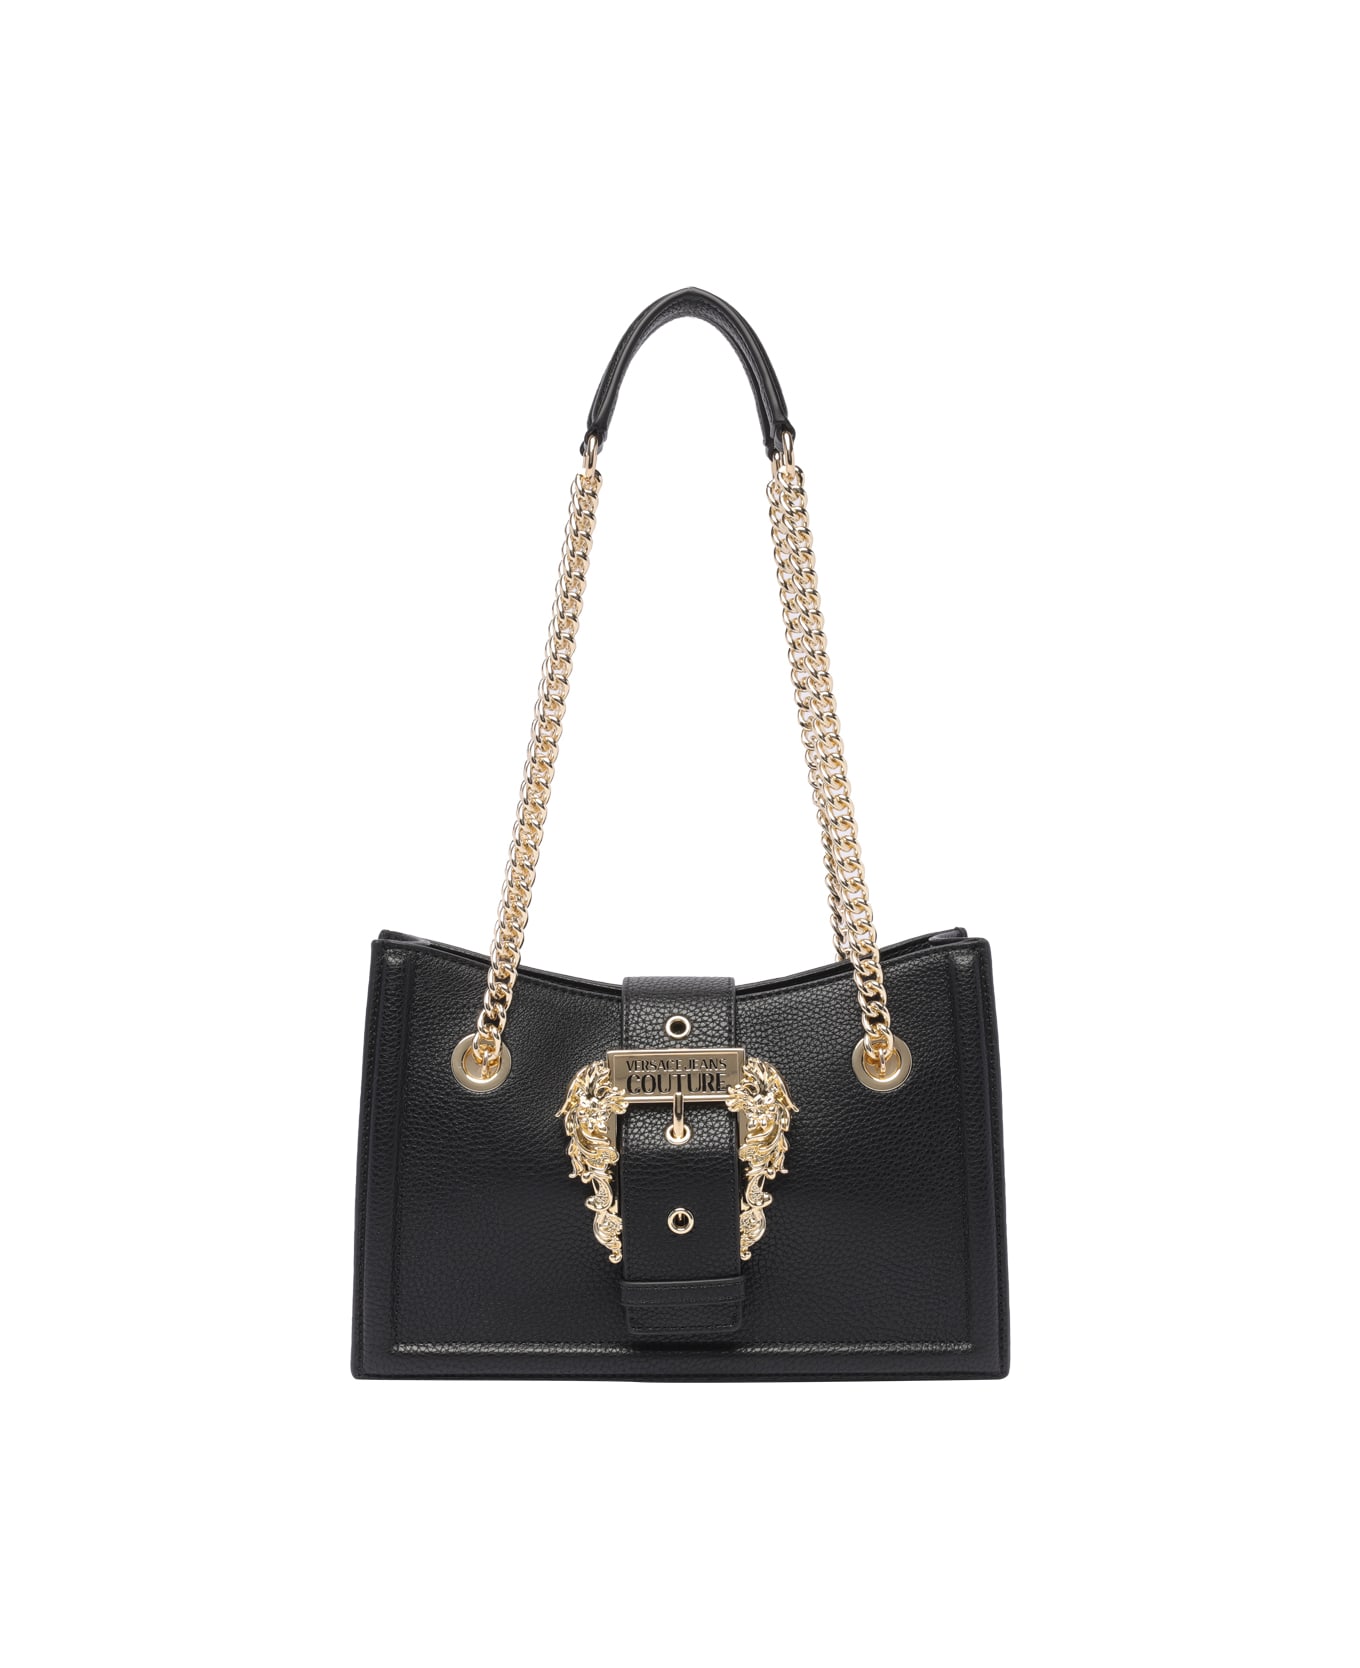 Versace Jeans Couture Embossed Buckle Bag - Black